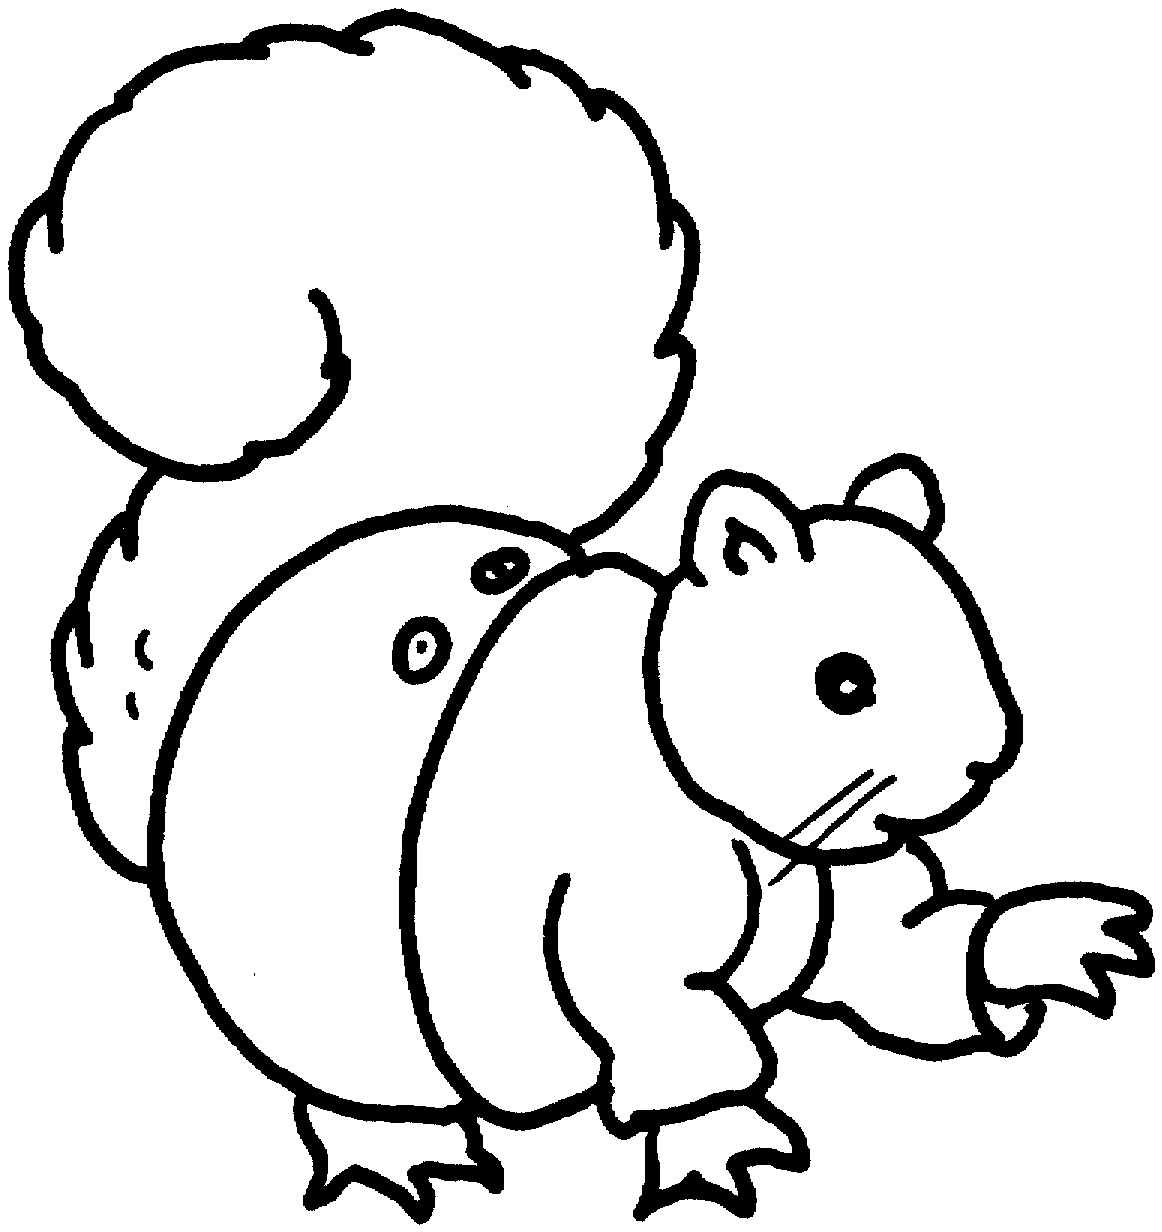 50 pictures of the most beautiful squirrels for children 14 - 50+ best coloring pictures of squirrels for children to practice coloring